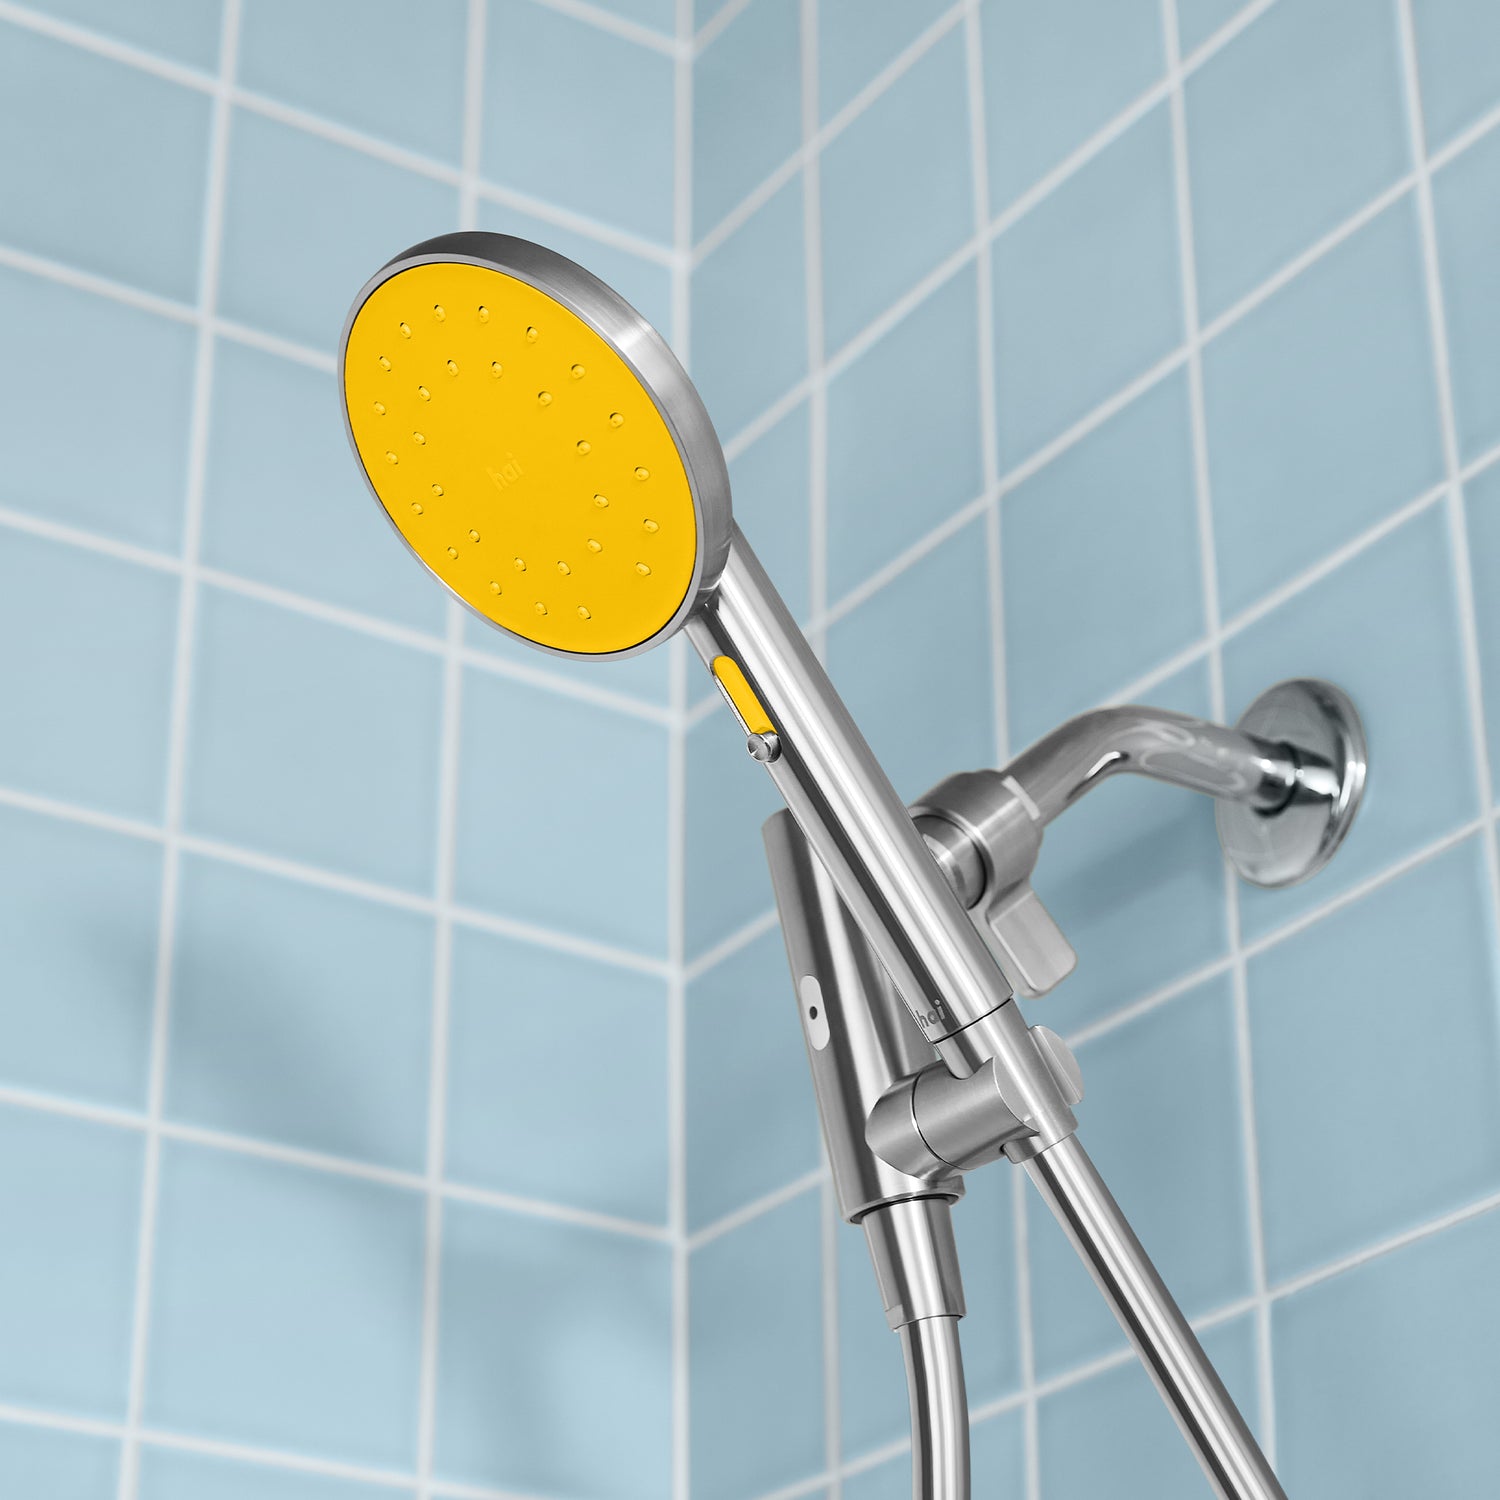 Best shower heads 2022: From power shower heads to quirky designs